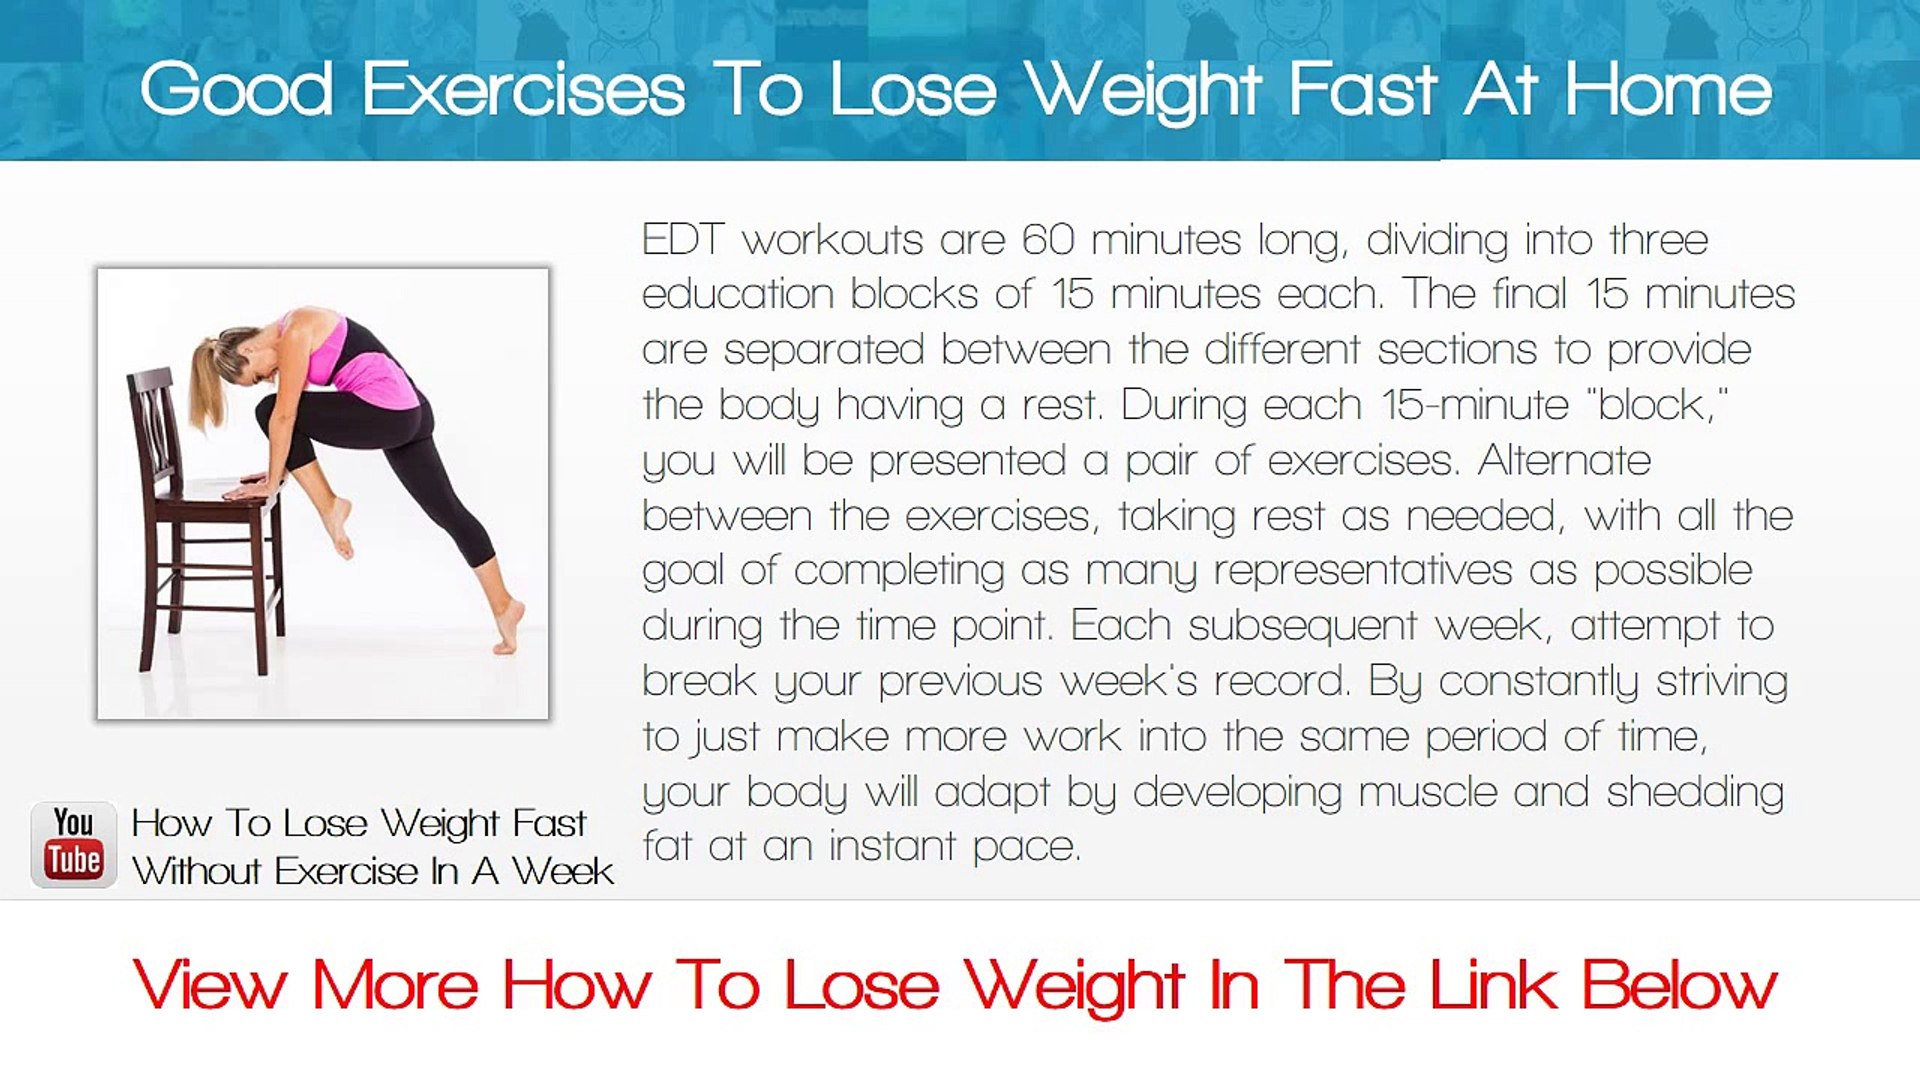 Good Exercises To Lose Weight Fast At Home